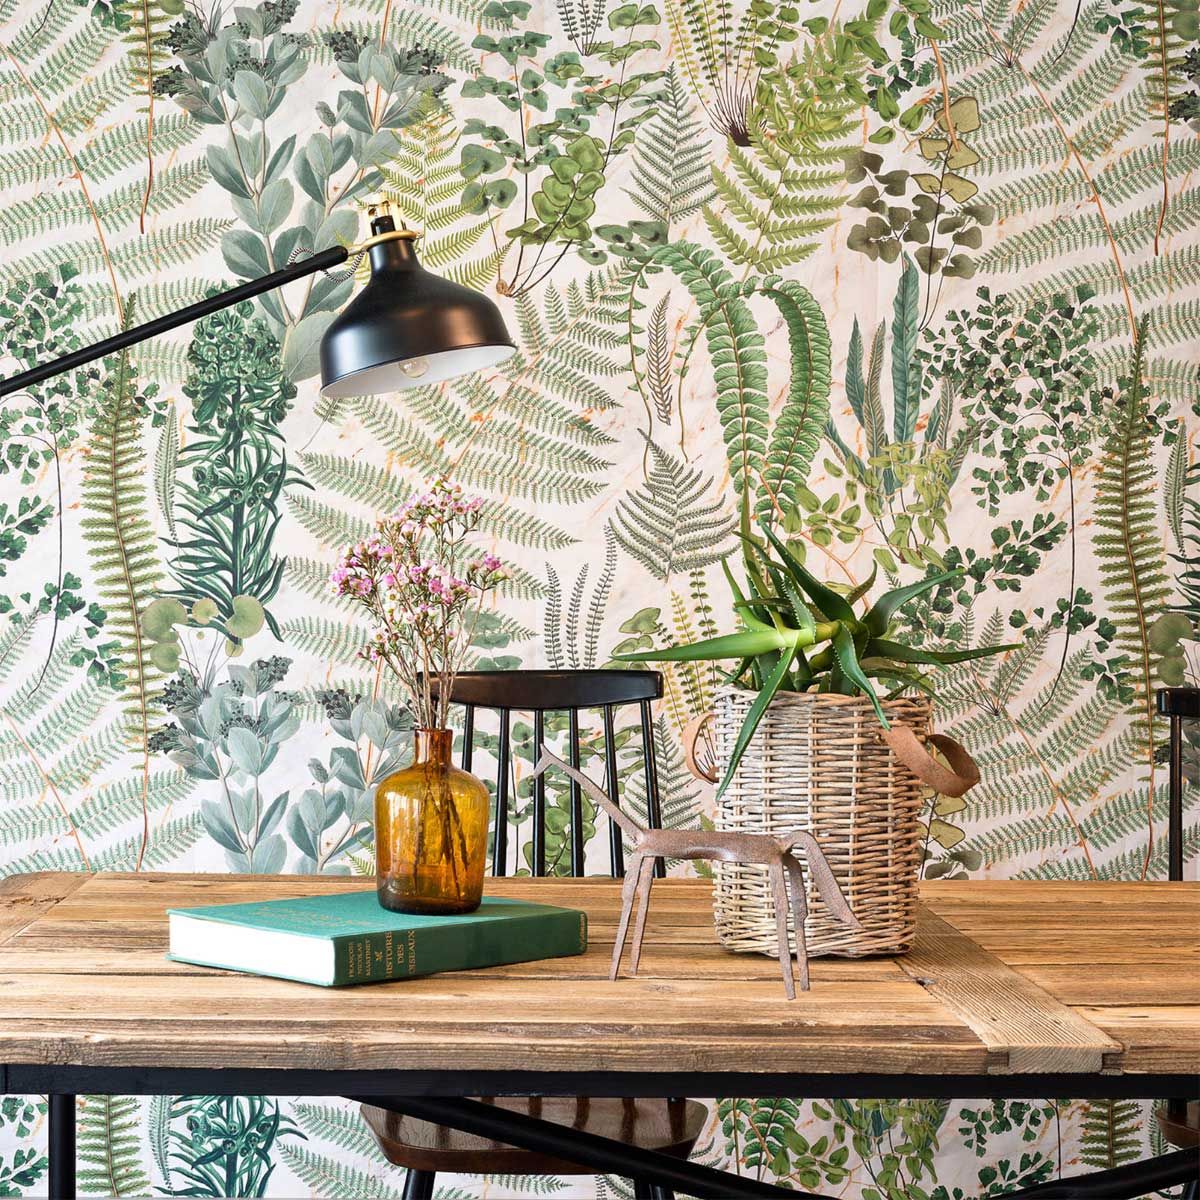 Transform your home with these rich murals